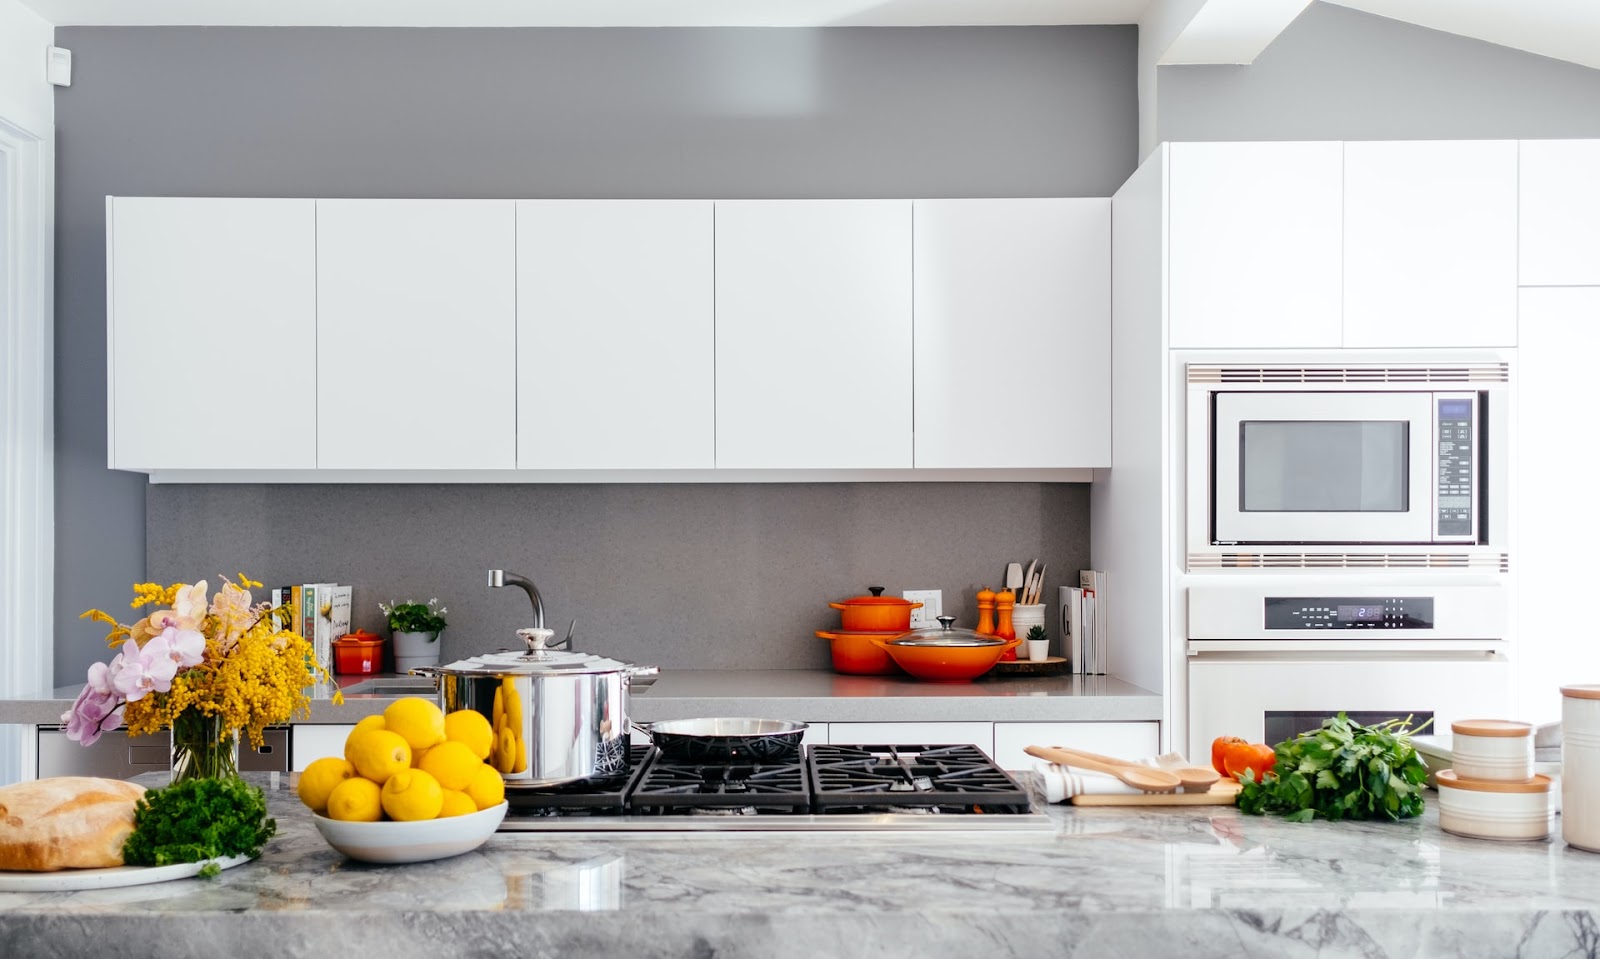 6 Affordable Buys to Make Your Kitchen Unique